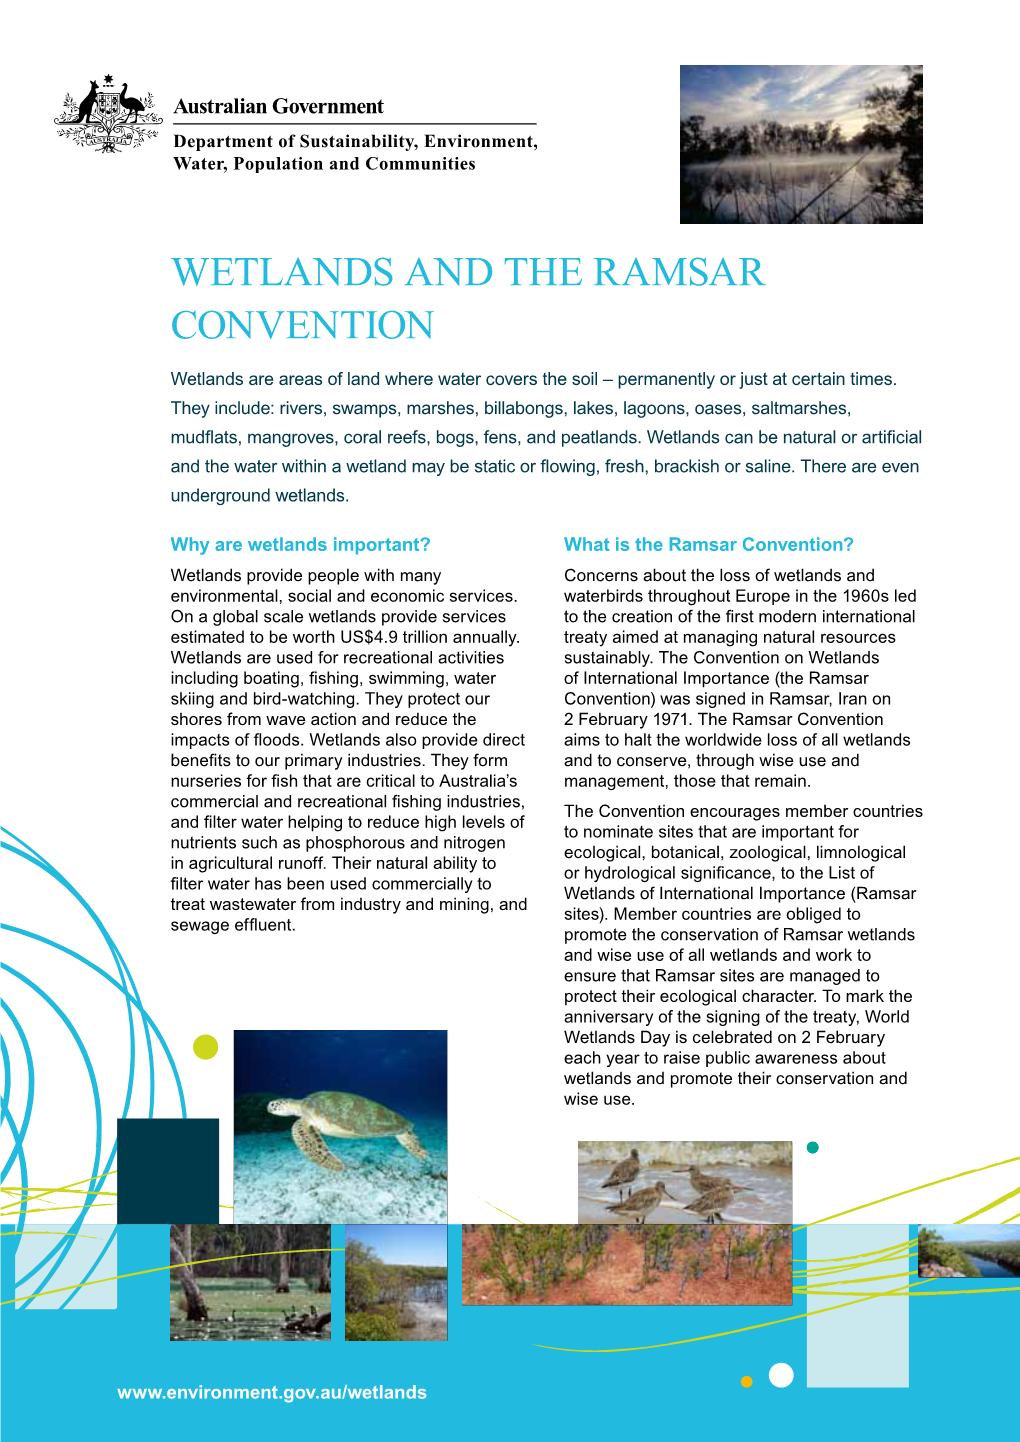 Wetlands and the Ramsar Convention